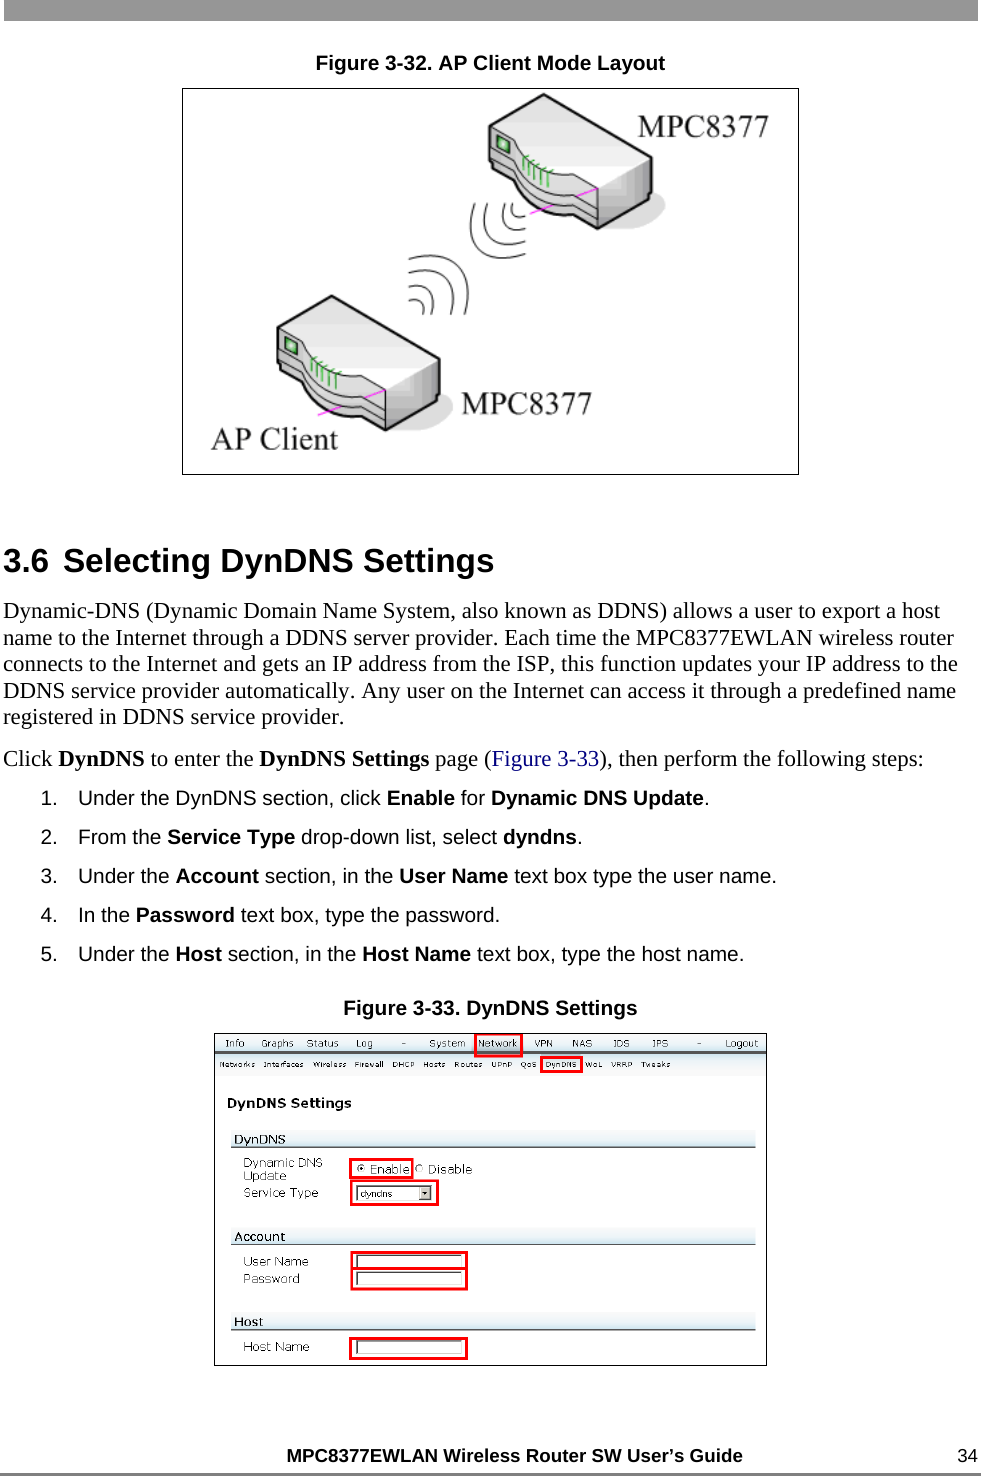                                                          MPC8377EWLAN Wireless Router SW User’s Guide    34 Figure 3-32. AP Client Mode Layout  3.6 Selecting DynDNS Settings Dynamic-DNS (Dynamic Domain Name System, also known as DDNS) allows a user to export a host name to the Internet through a DDNS server provider. Each time the MPC8377EWLAN wireless router connects to the Internet and gets an IP address from the ISP, this function updates your IP address to the DDNS service provider automatically. Any user on the Internet can access it through a predefined name registered in DDNS service provider. Click DynDNS to enter the DynDNS Settings page (Figure 3-33), then perform the following steps: 1.  Under the DynDNS section, click Enable for Dynamic DNS Update. 2. From the Service Type drop-down list, select dyndns. 3. Under the Account section, in the User Name text box type the user name. 4. In the Password text box, type the password. 5. Under the Host section, in the Host Name text box, type the host name. Figure 3-33. DynDNS Settings  